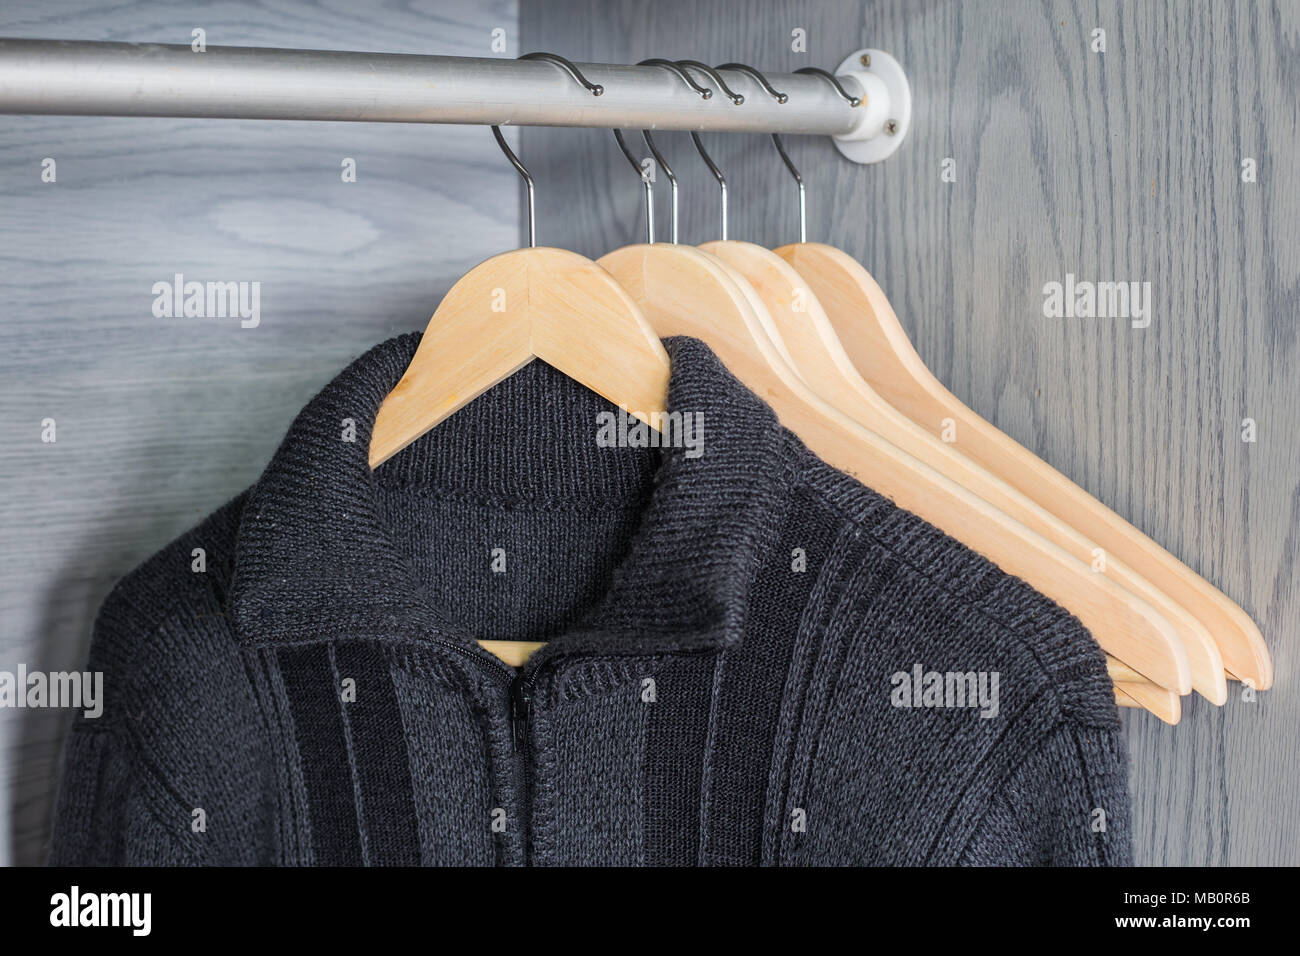 https://c8.alamy.com/comp/MB0R6B/a-hanger-with-things-knitted-sweaters-hang-on-hangers-bright-sweaters-spring-clothes-MB0R6B.jpg